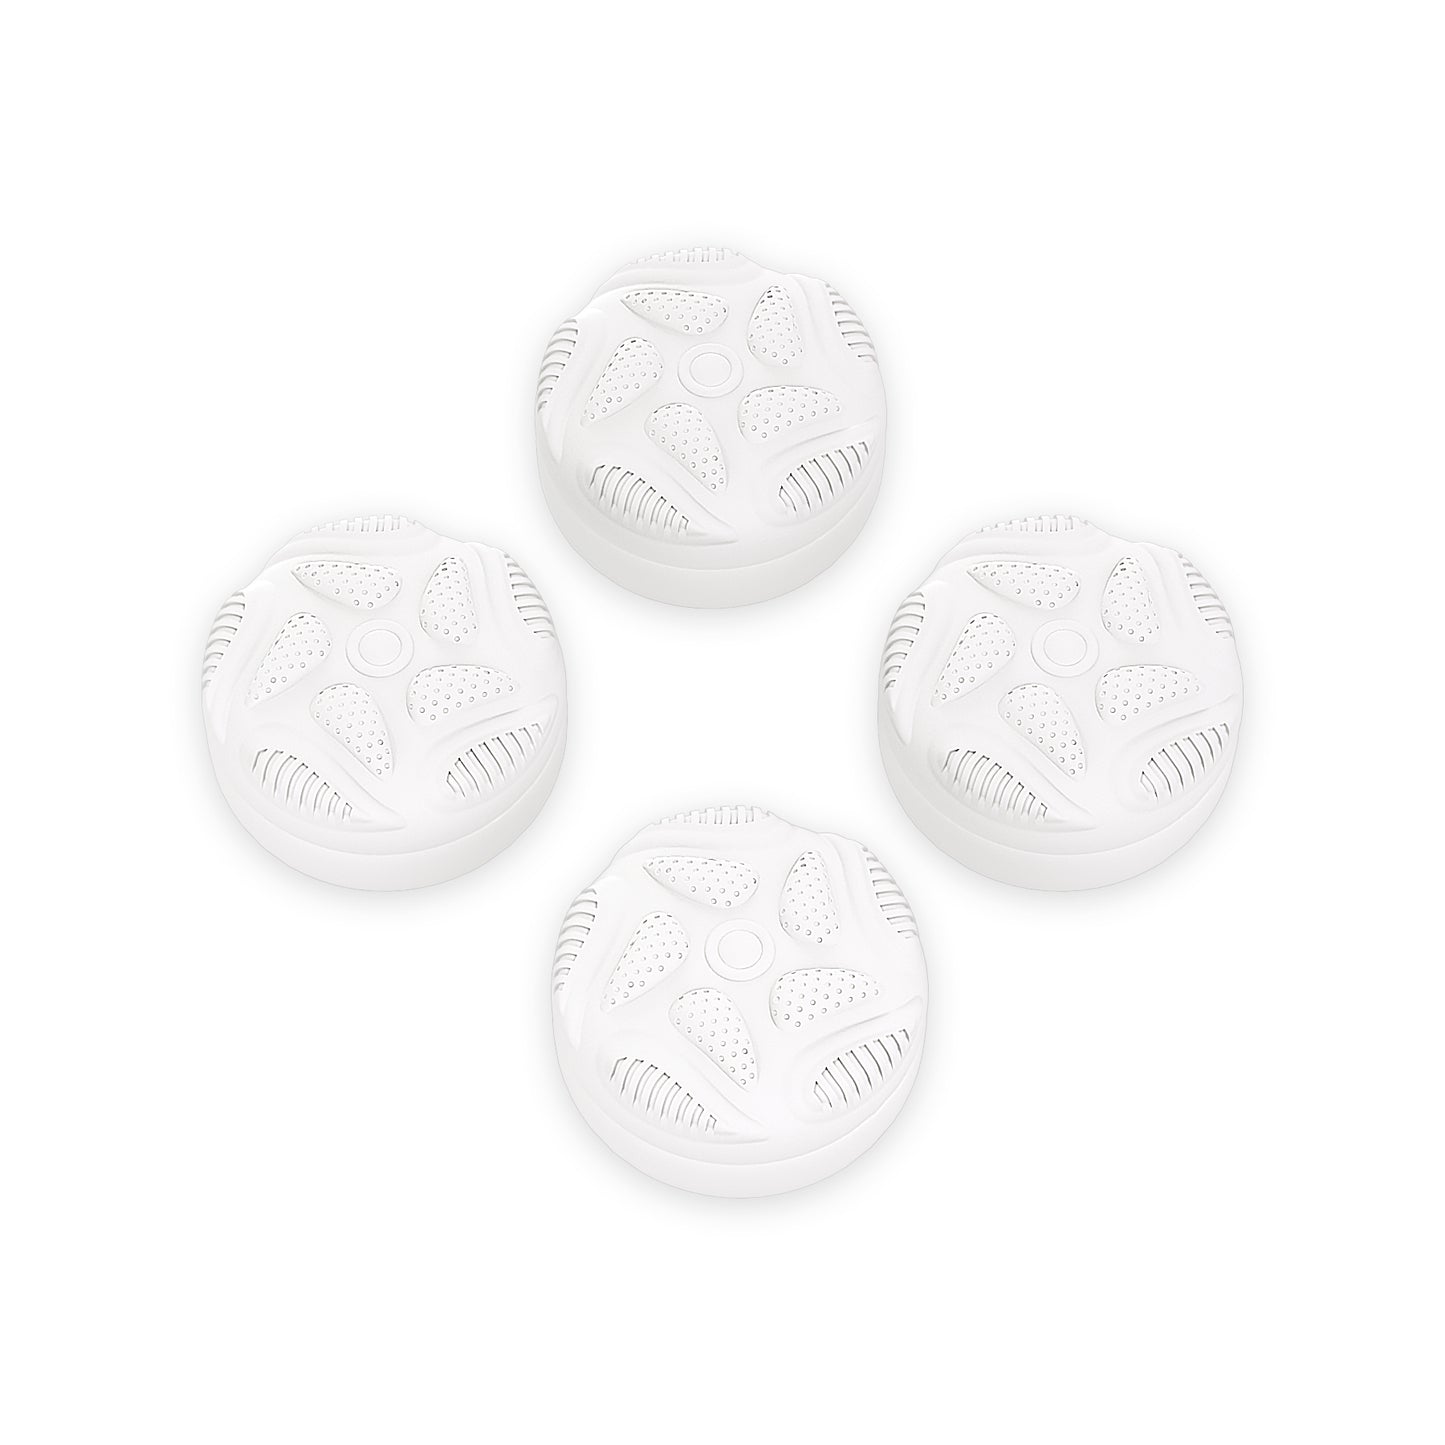 PlayVital Thumbs Cushion Caps Thumb Grips for ps5/4, Thumbstick Grip Cover for Xbox Series X/S, Thumb Grip Caps for Xbox One, Elite Series 2, for Switch Pro Controller - Raindrop Texture Design White - PJM3034 PlayVital